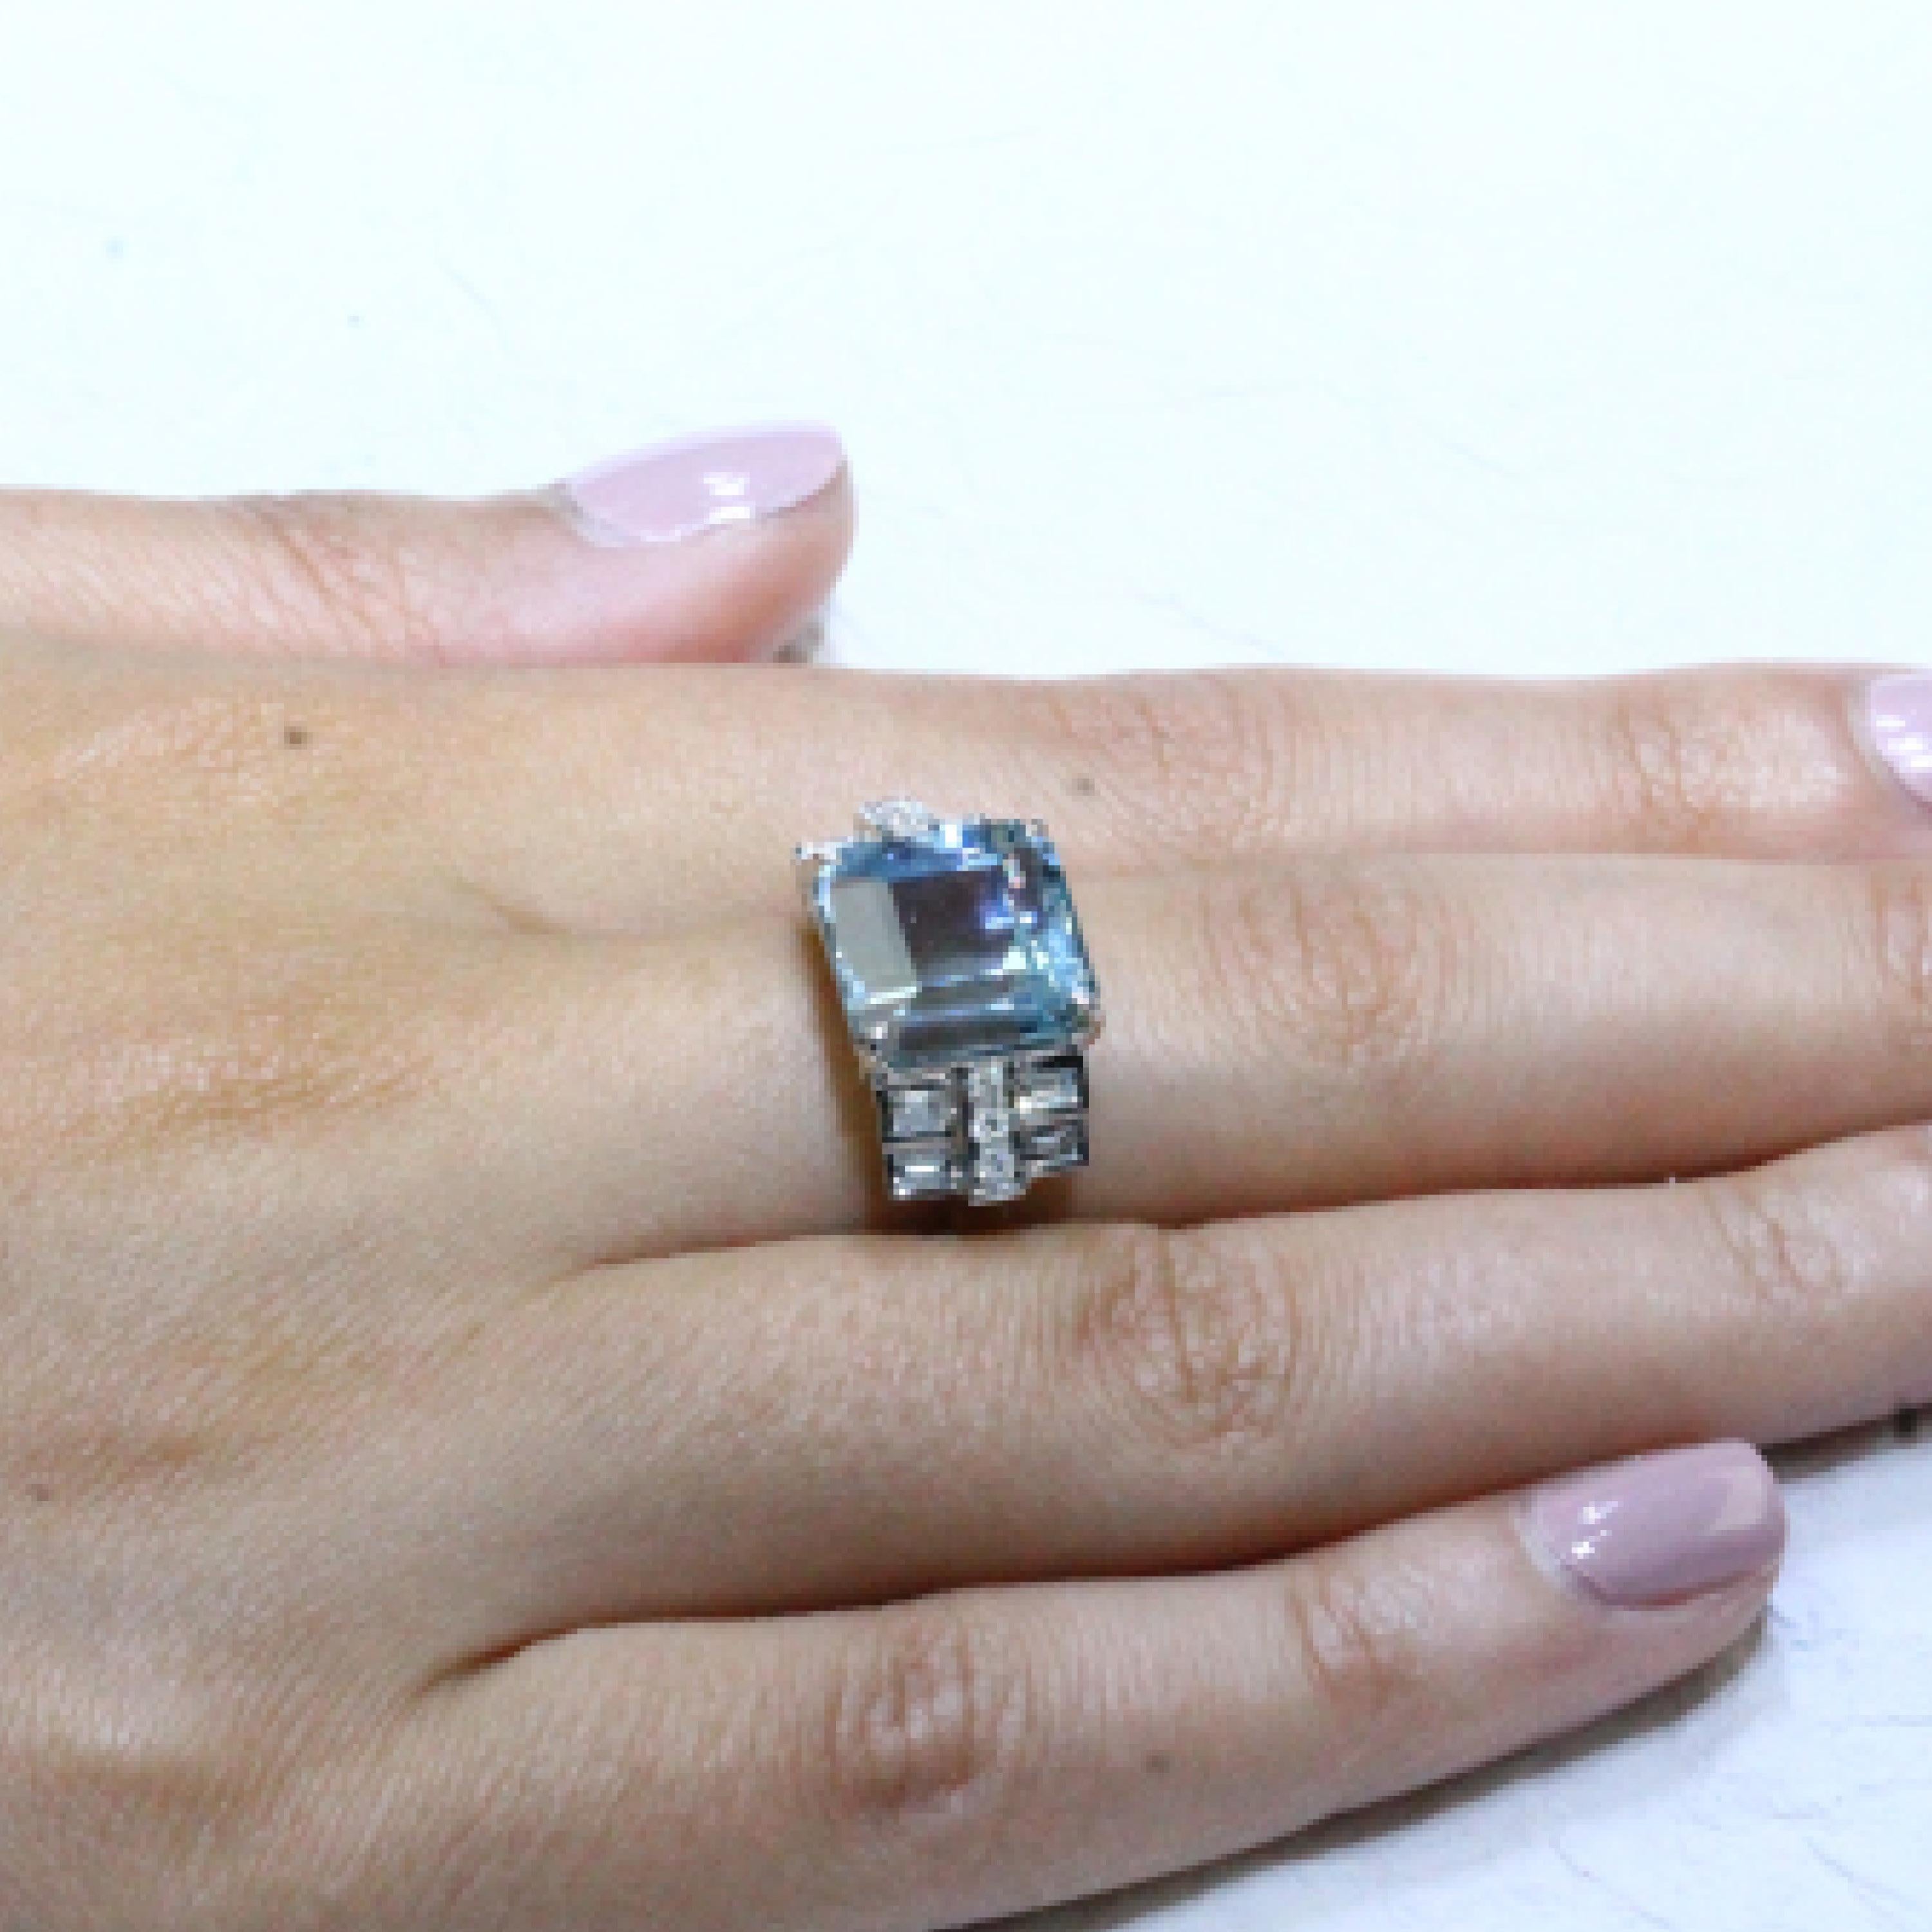 18K White Gold Ring Featuring a Square 6.58 carat Aquamarine, accented by Round and Baguette Diamonds. Finger size 6.5, adjustable upon request/quote. Aquamarine evokes the purity of crystalline waters, and the exhilaration and relaxation of the